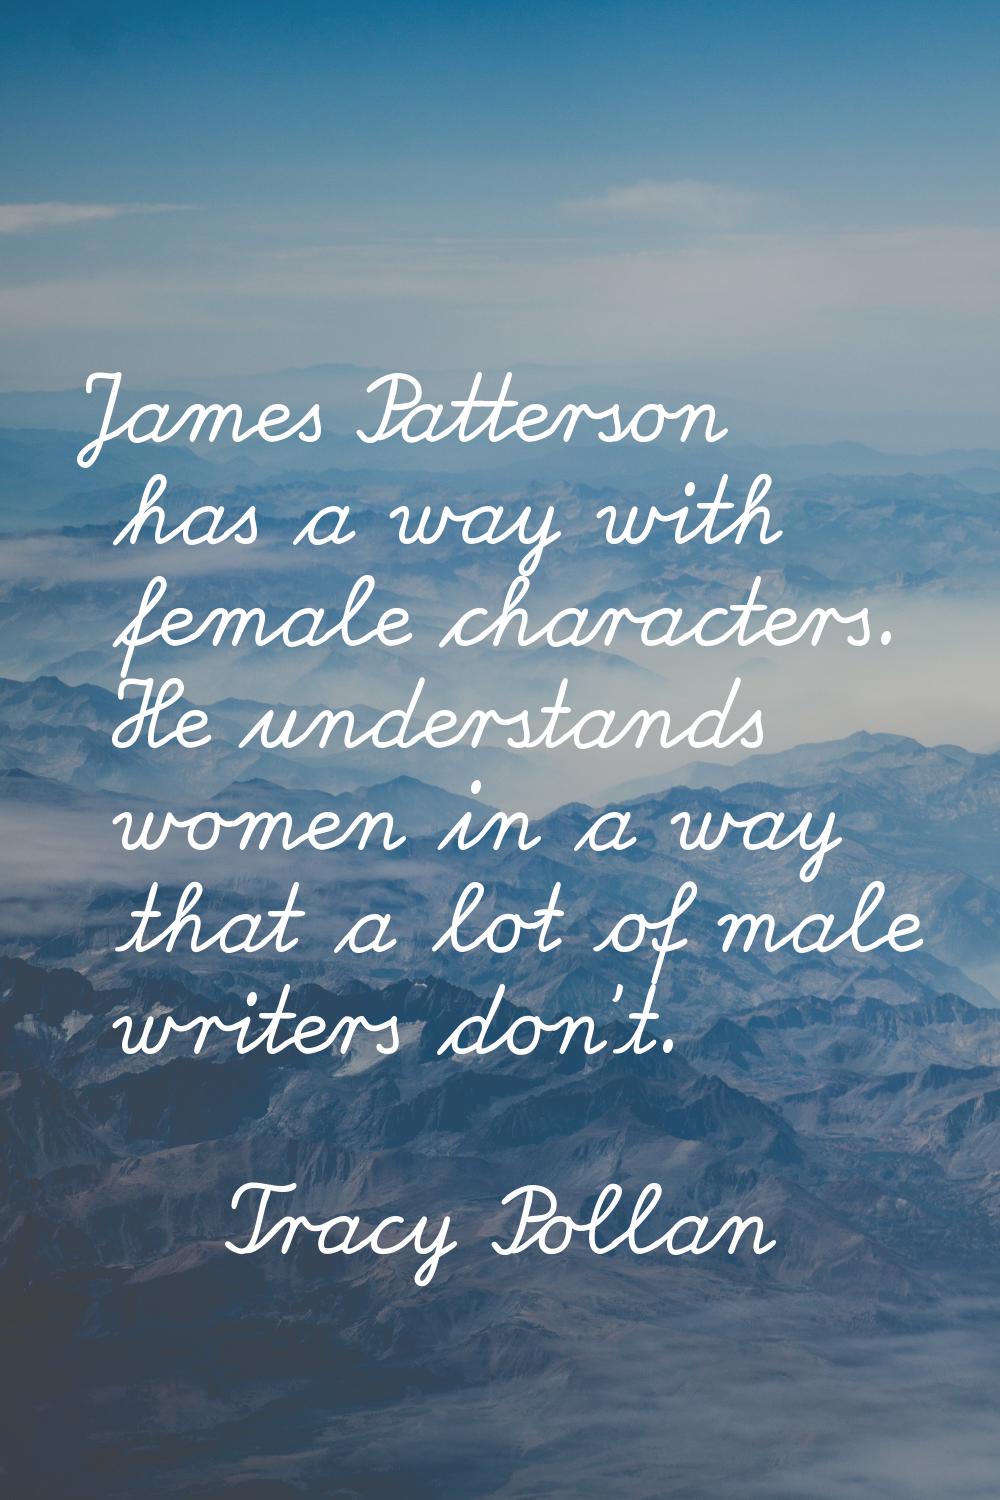 James Patterson has a way with female characters. He understands women in a way that a lot of male 